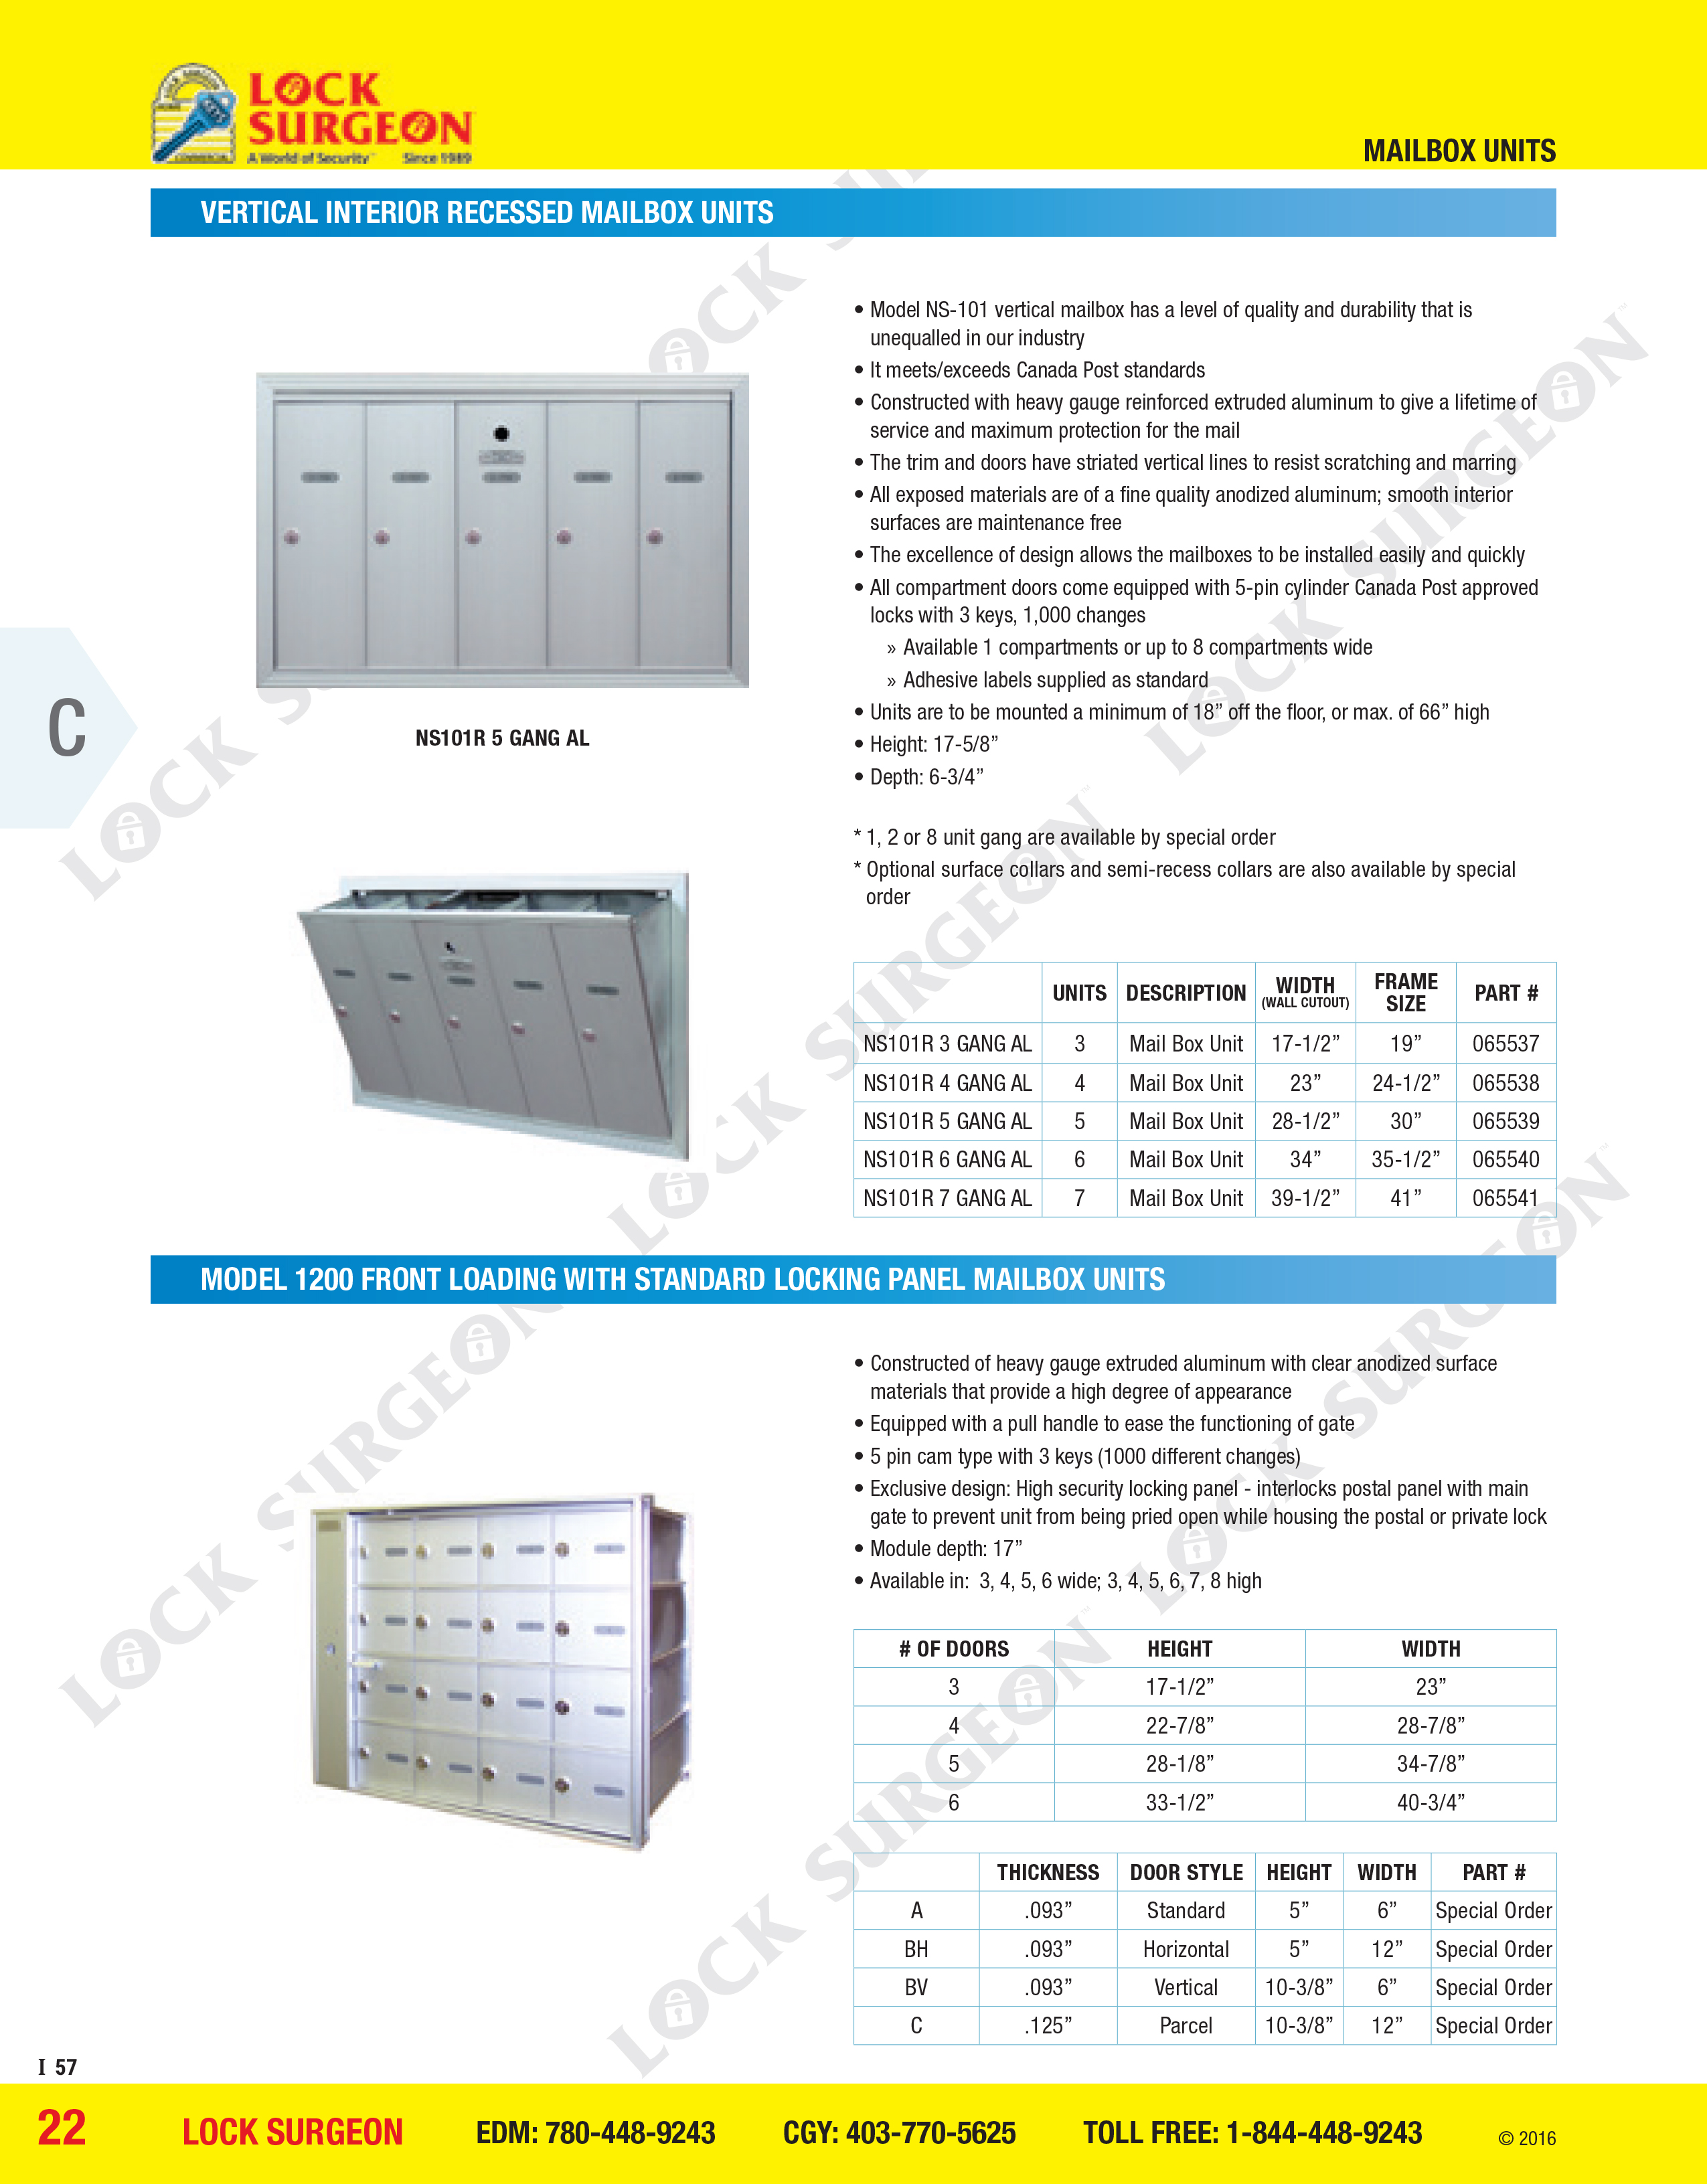 Vertical interior recessed mailbox units, Model 1200 front loading with standard locking panel mailbox units